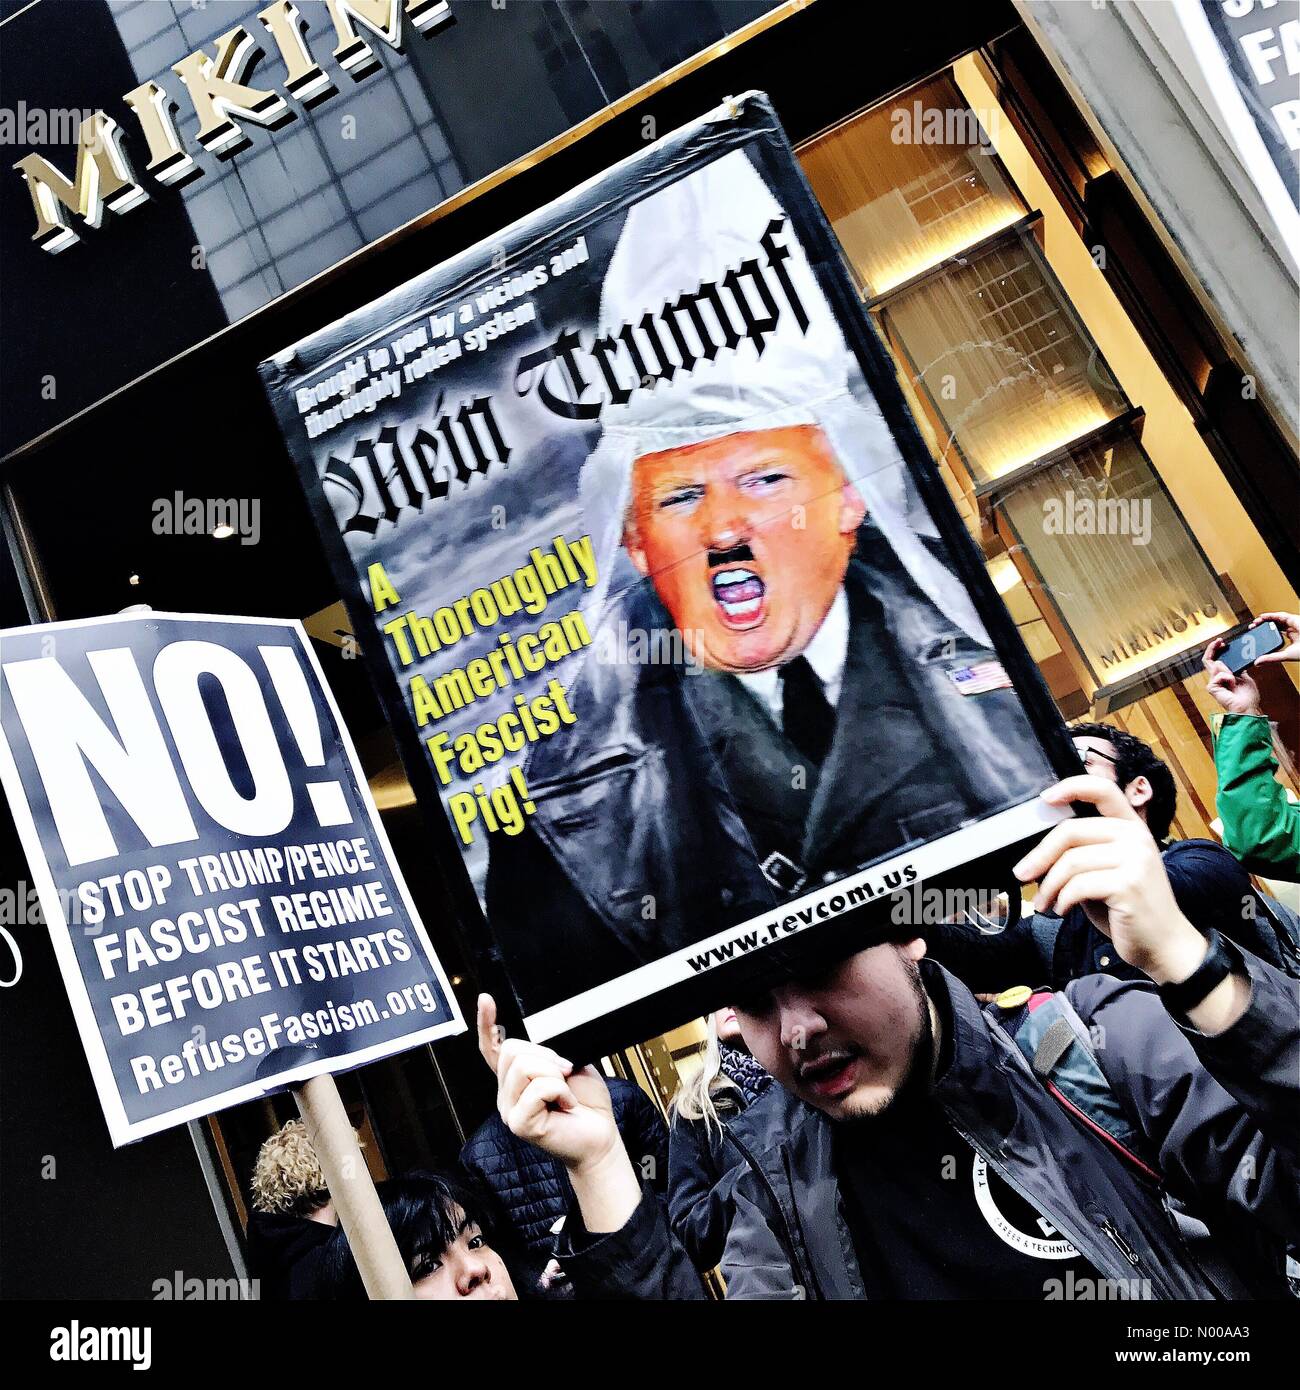 E 57th St, New York, New York, USA. 11th Jan, 2017. A protester holds up a banner outside Trump Tower in New York City as President Elect Donald Trump gives a press conference inside, his first since winning the 2016 US election. © Andy Buchanan1/StockimoNews/Alamy Live News Stock Photo